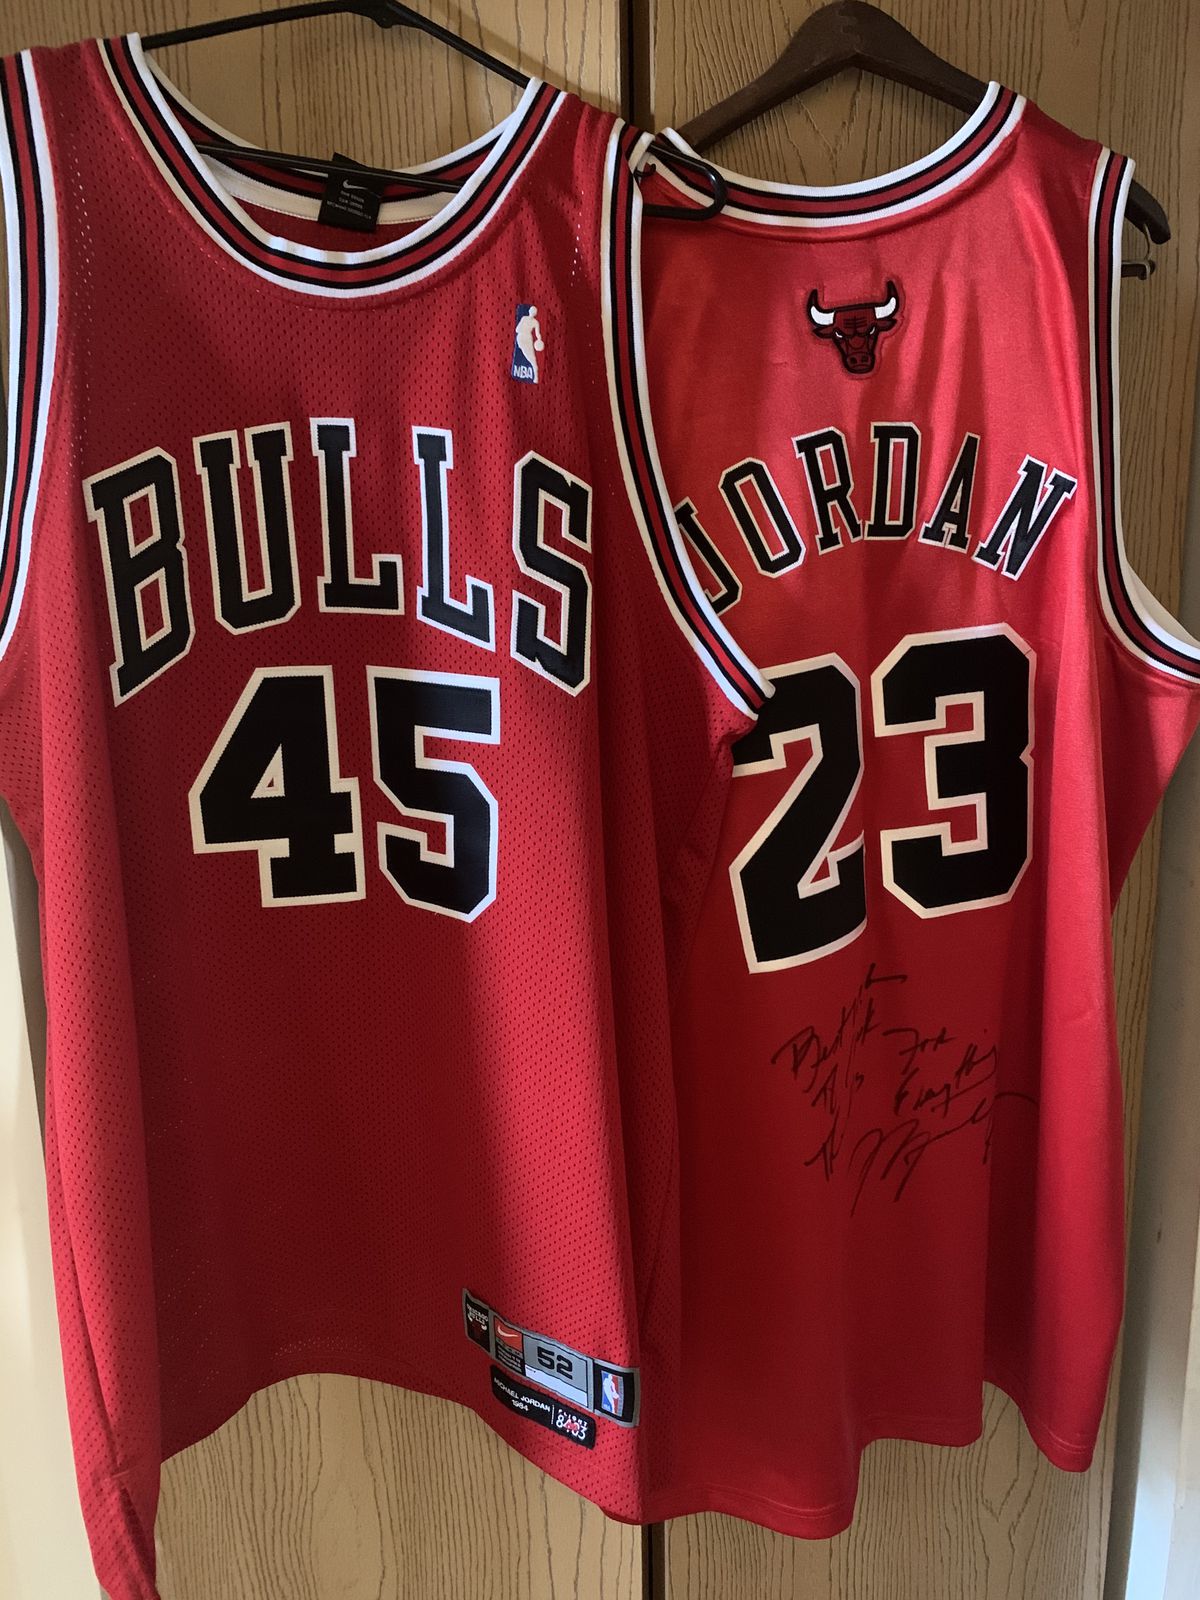 Two red basketball jerseys hanging from hangers.